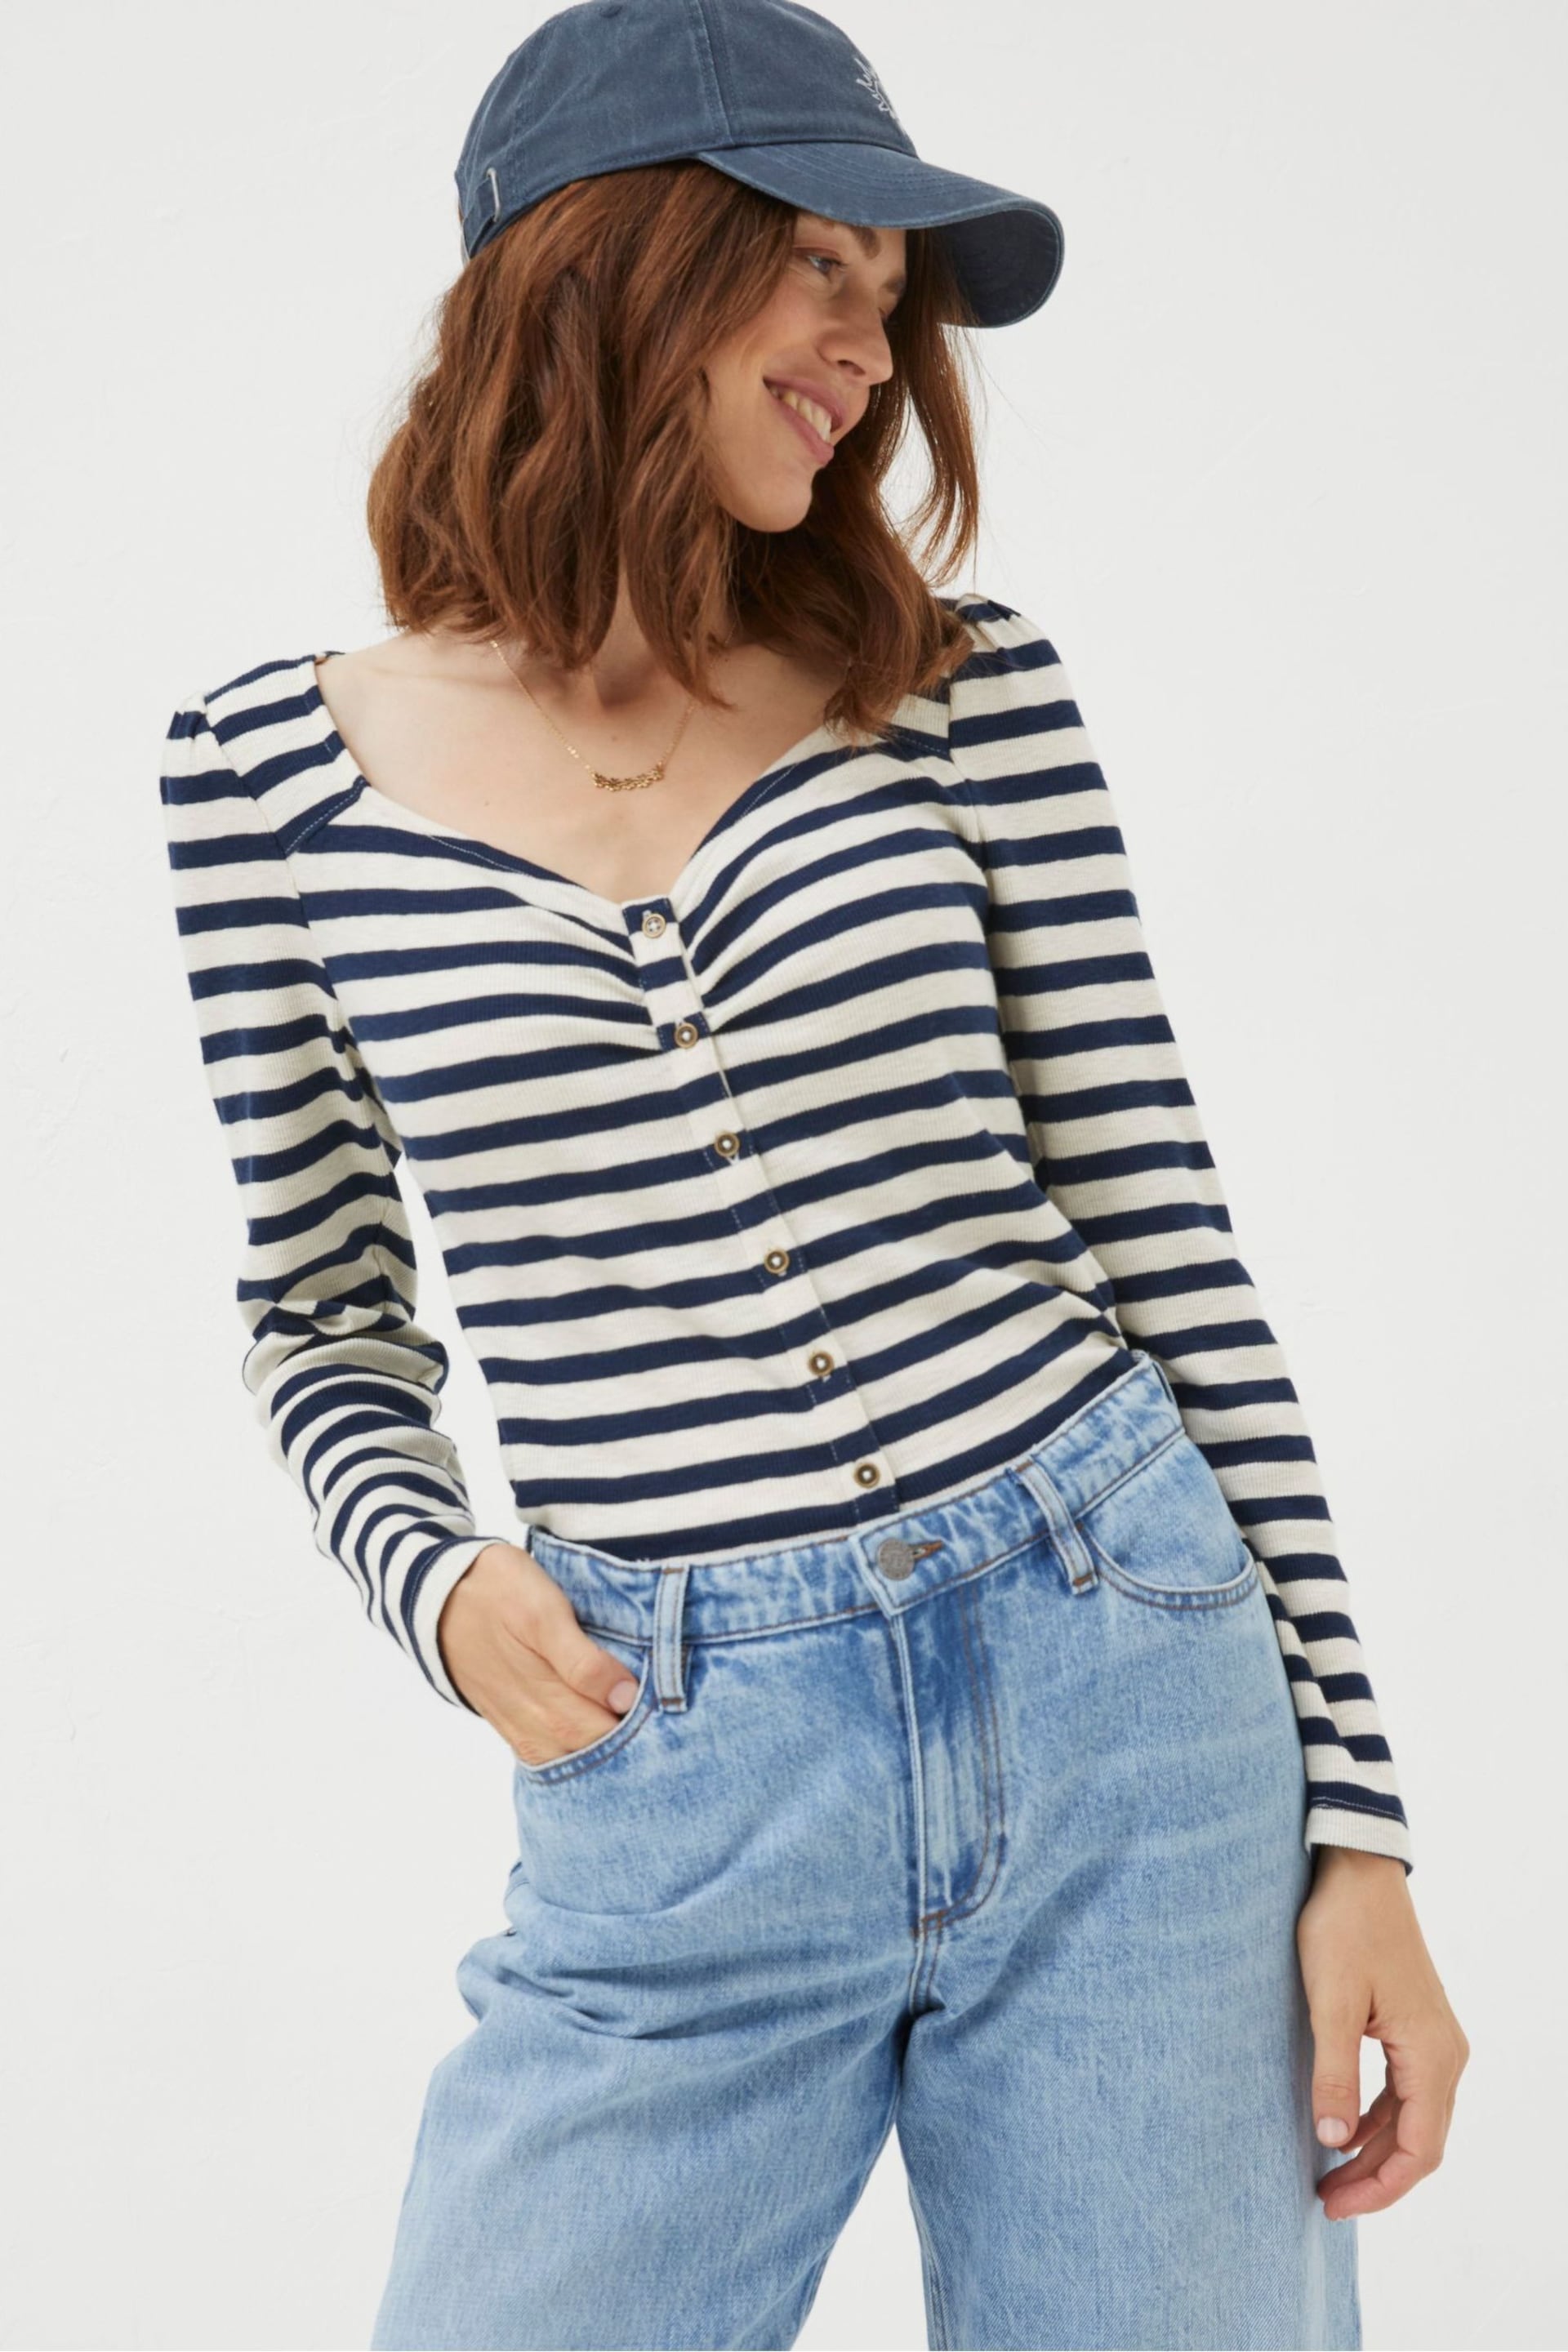 FatFace Blue Carly Stripe Top - Image 1 of 5